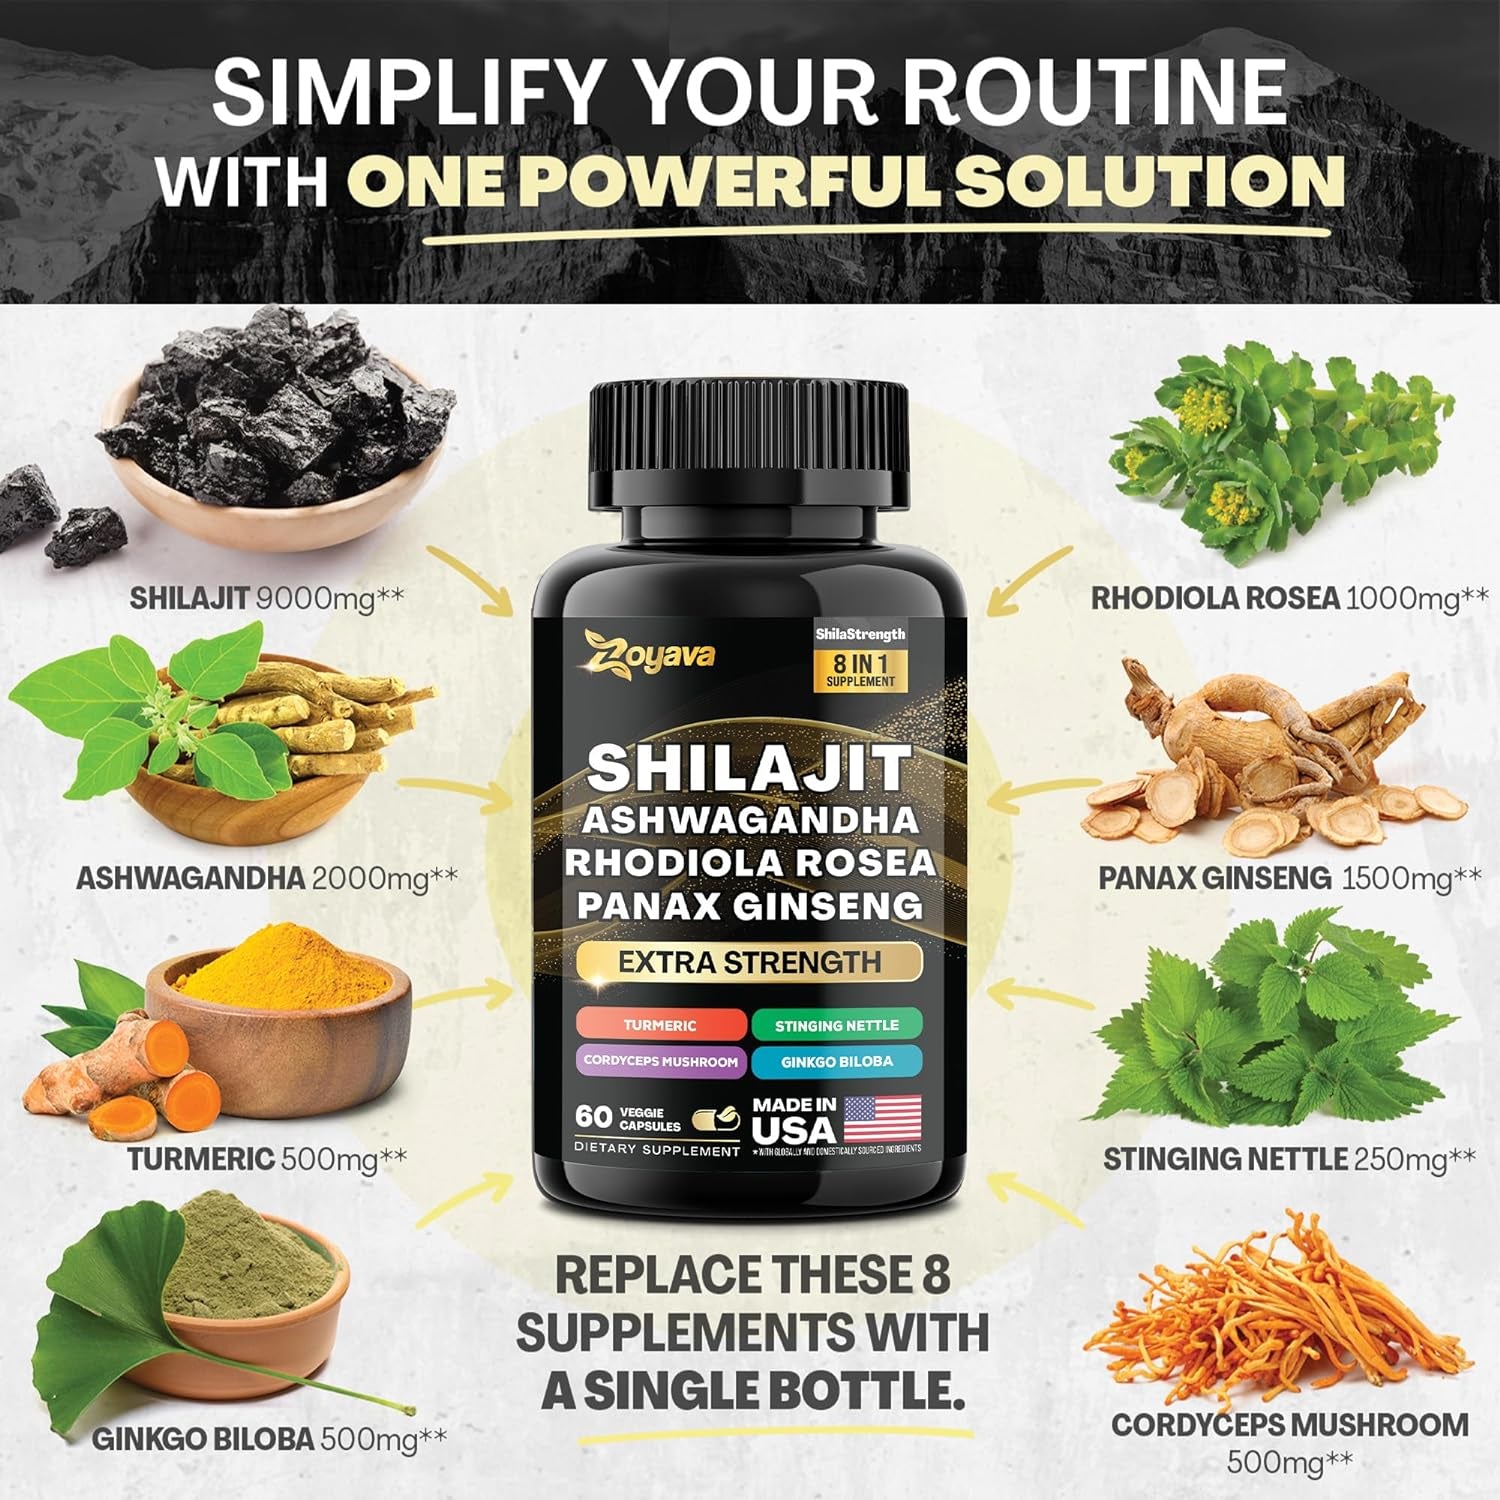 Shilajit 8-In-1 and Colostrum 8-In-1 Supplement Bundle